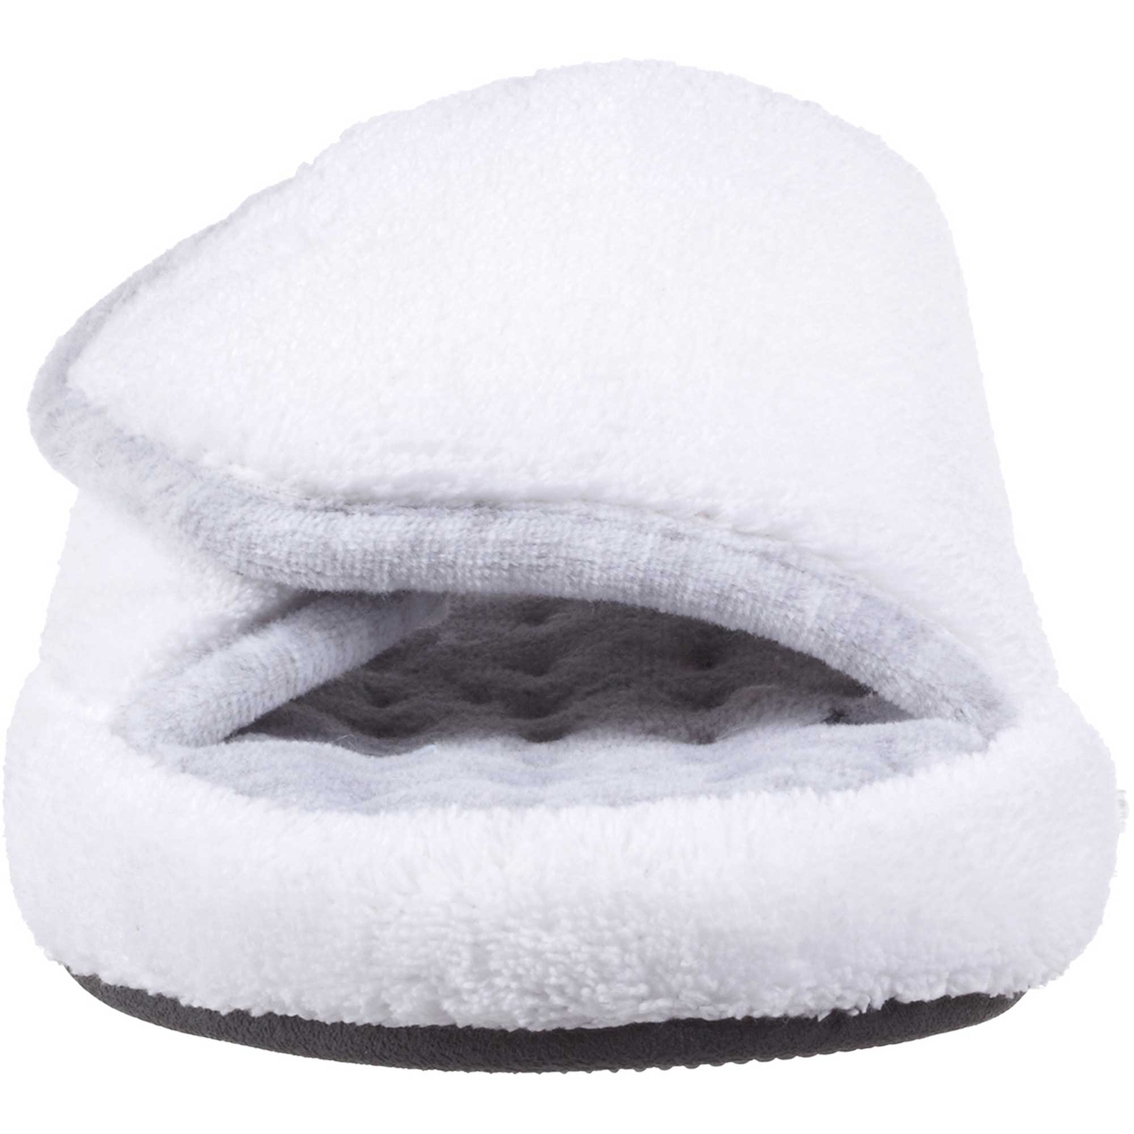 Isotoner Women's Totes  Microterry Pillow Step Spa Slippers - Image 5 of 6